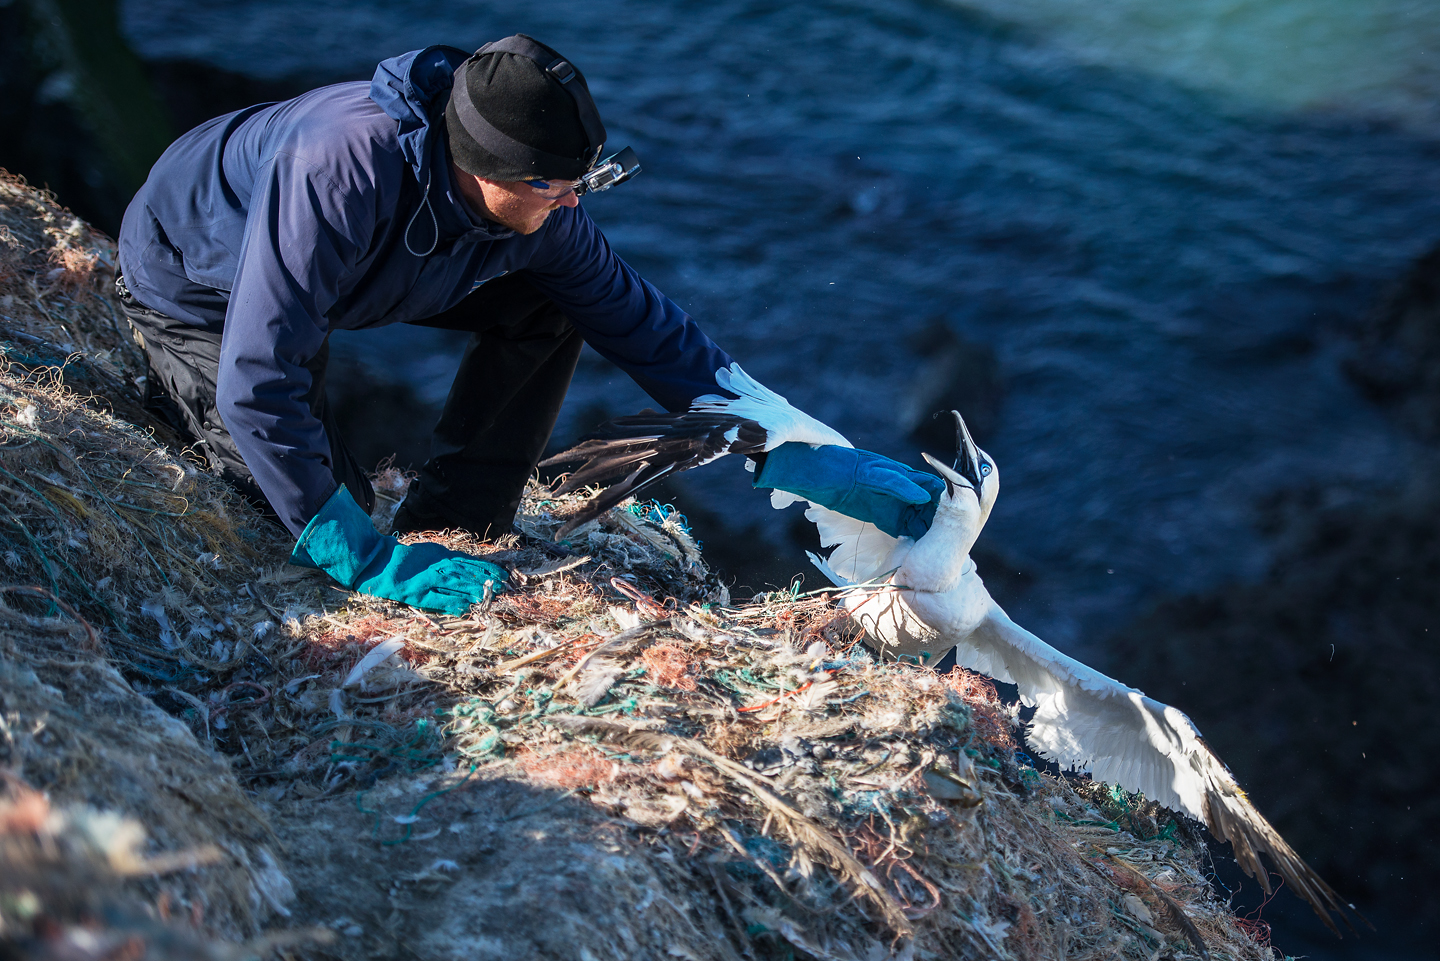  A team of volunteers led by RSPB Ramsey Island warden Greg Morgan visit Grassholm each year at the end of the breeding season. They are on a rescue mission to save as many gannets as possible from this death sentence 